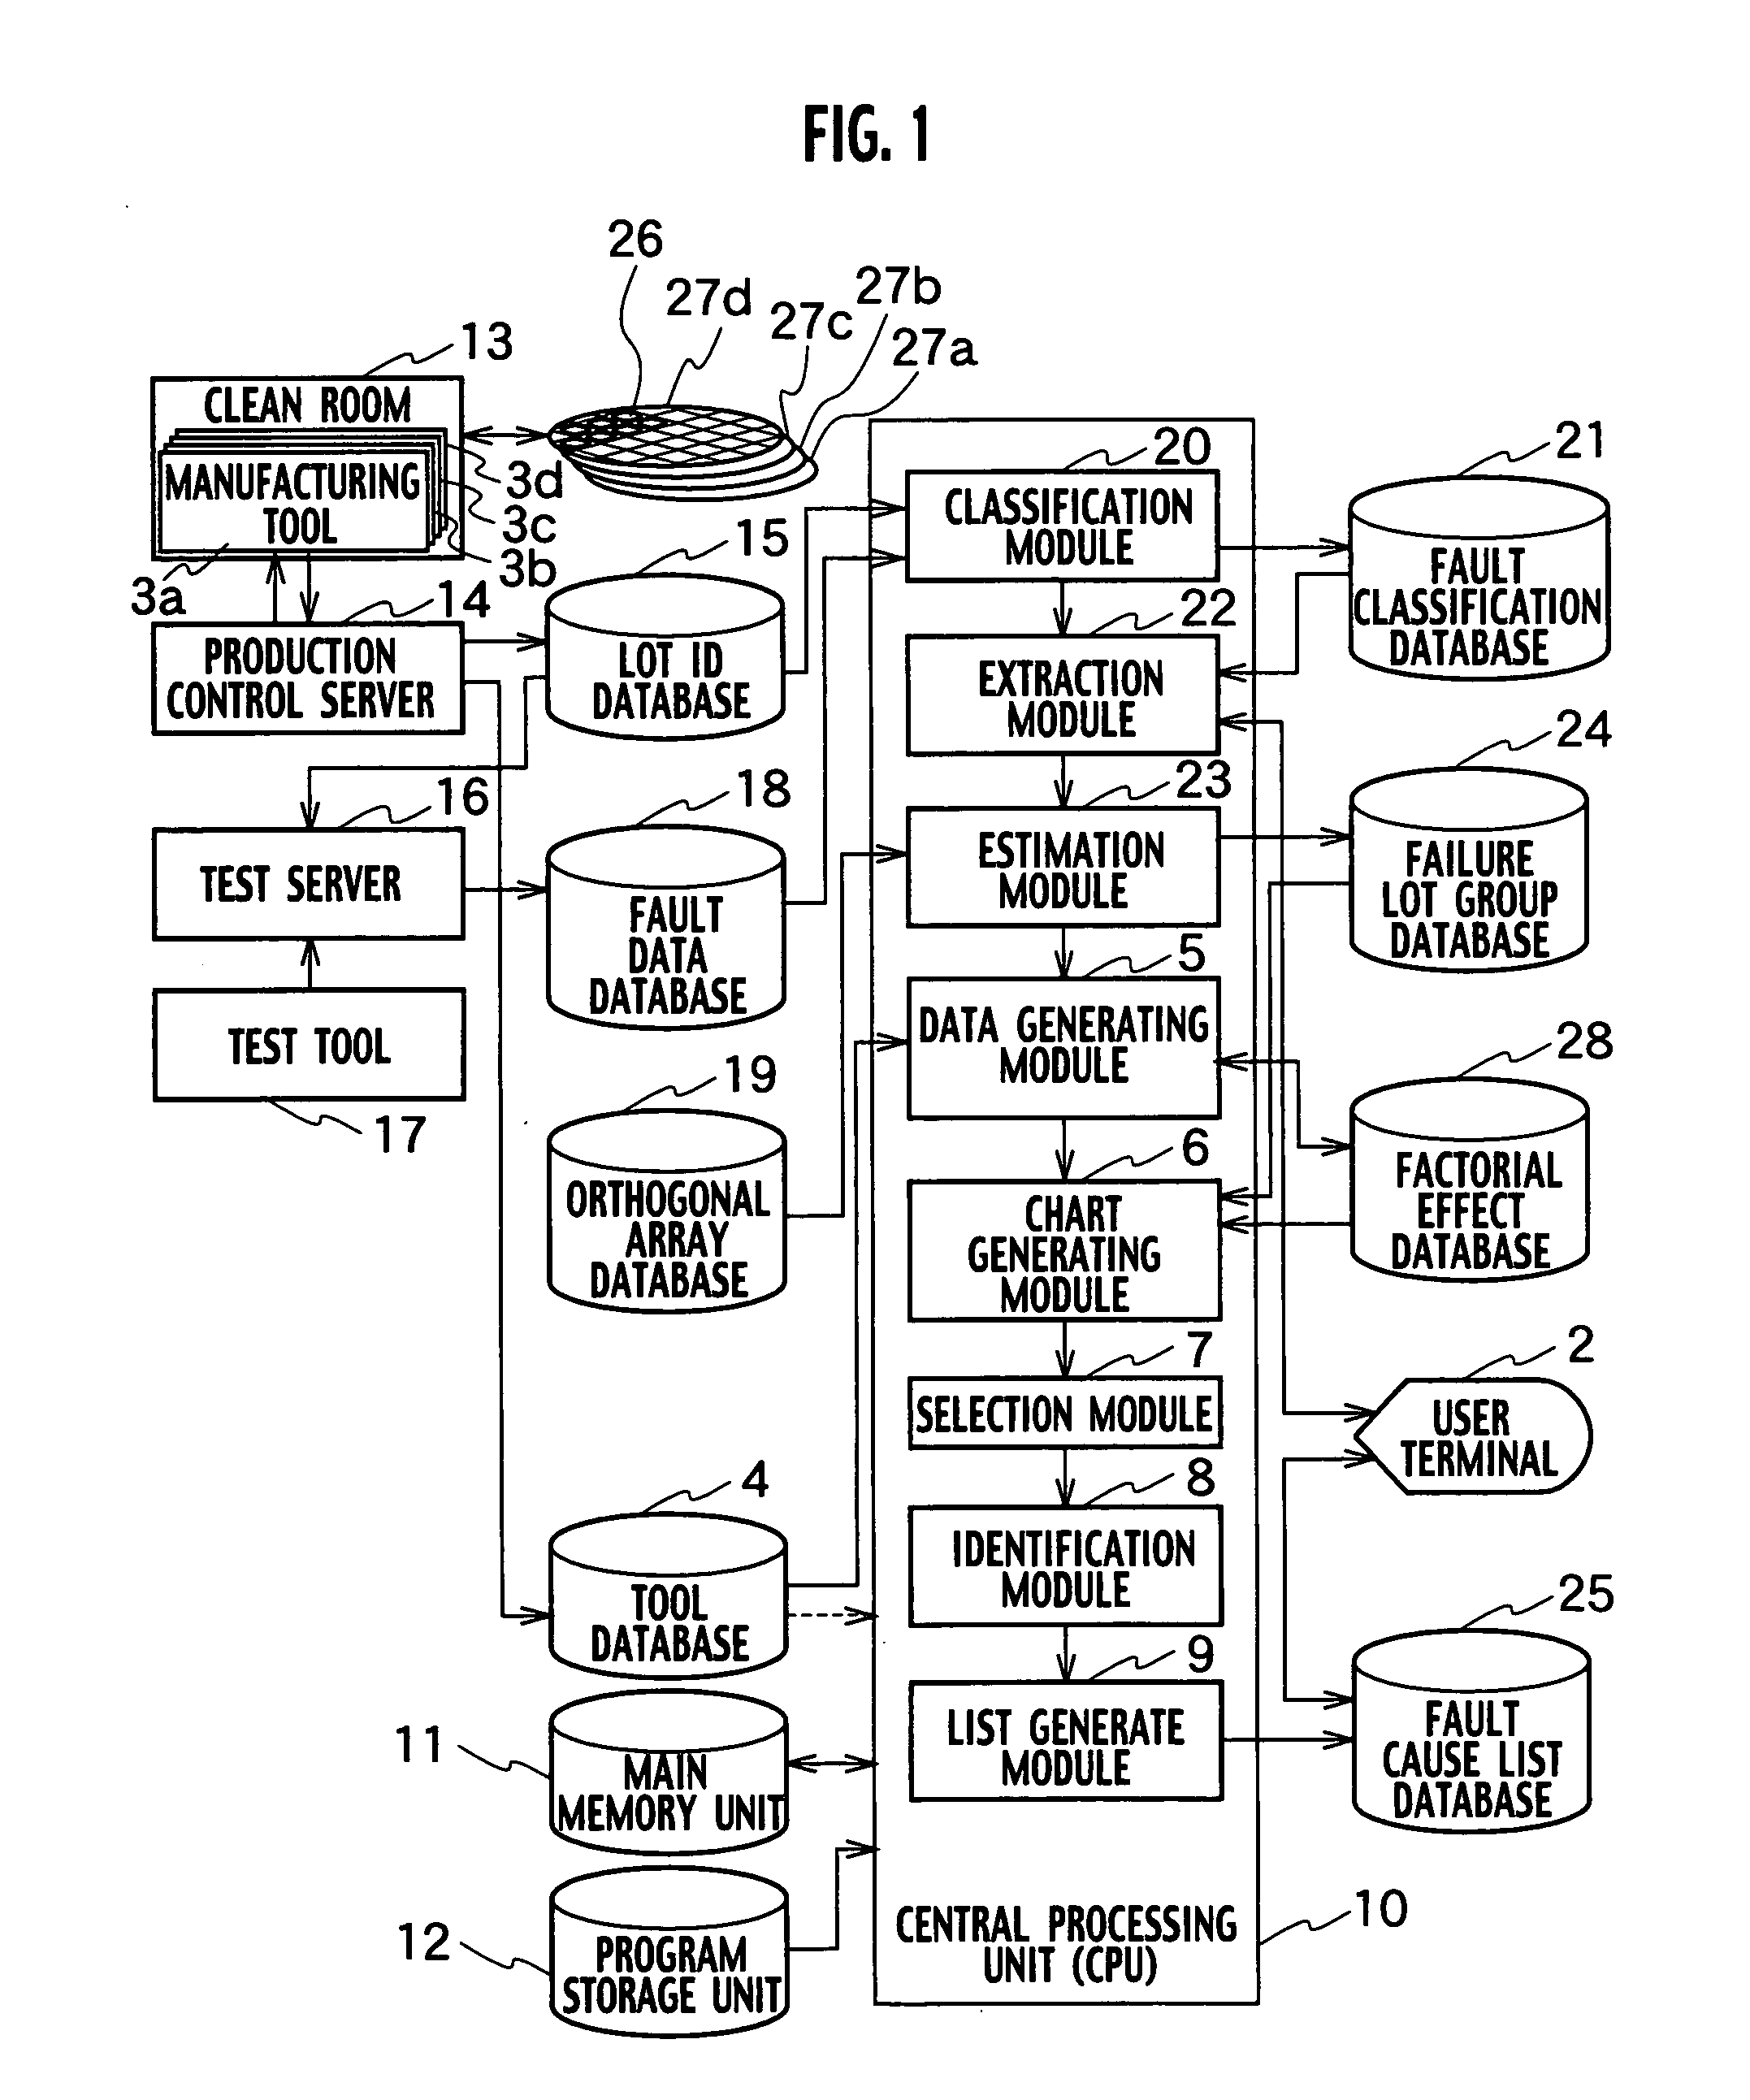 System and method for identifying a manufacturing tool causing a fault